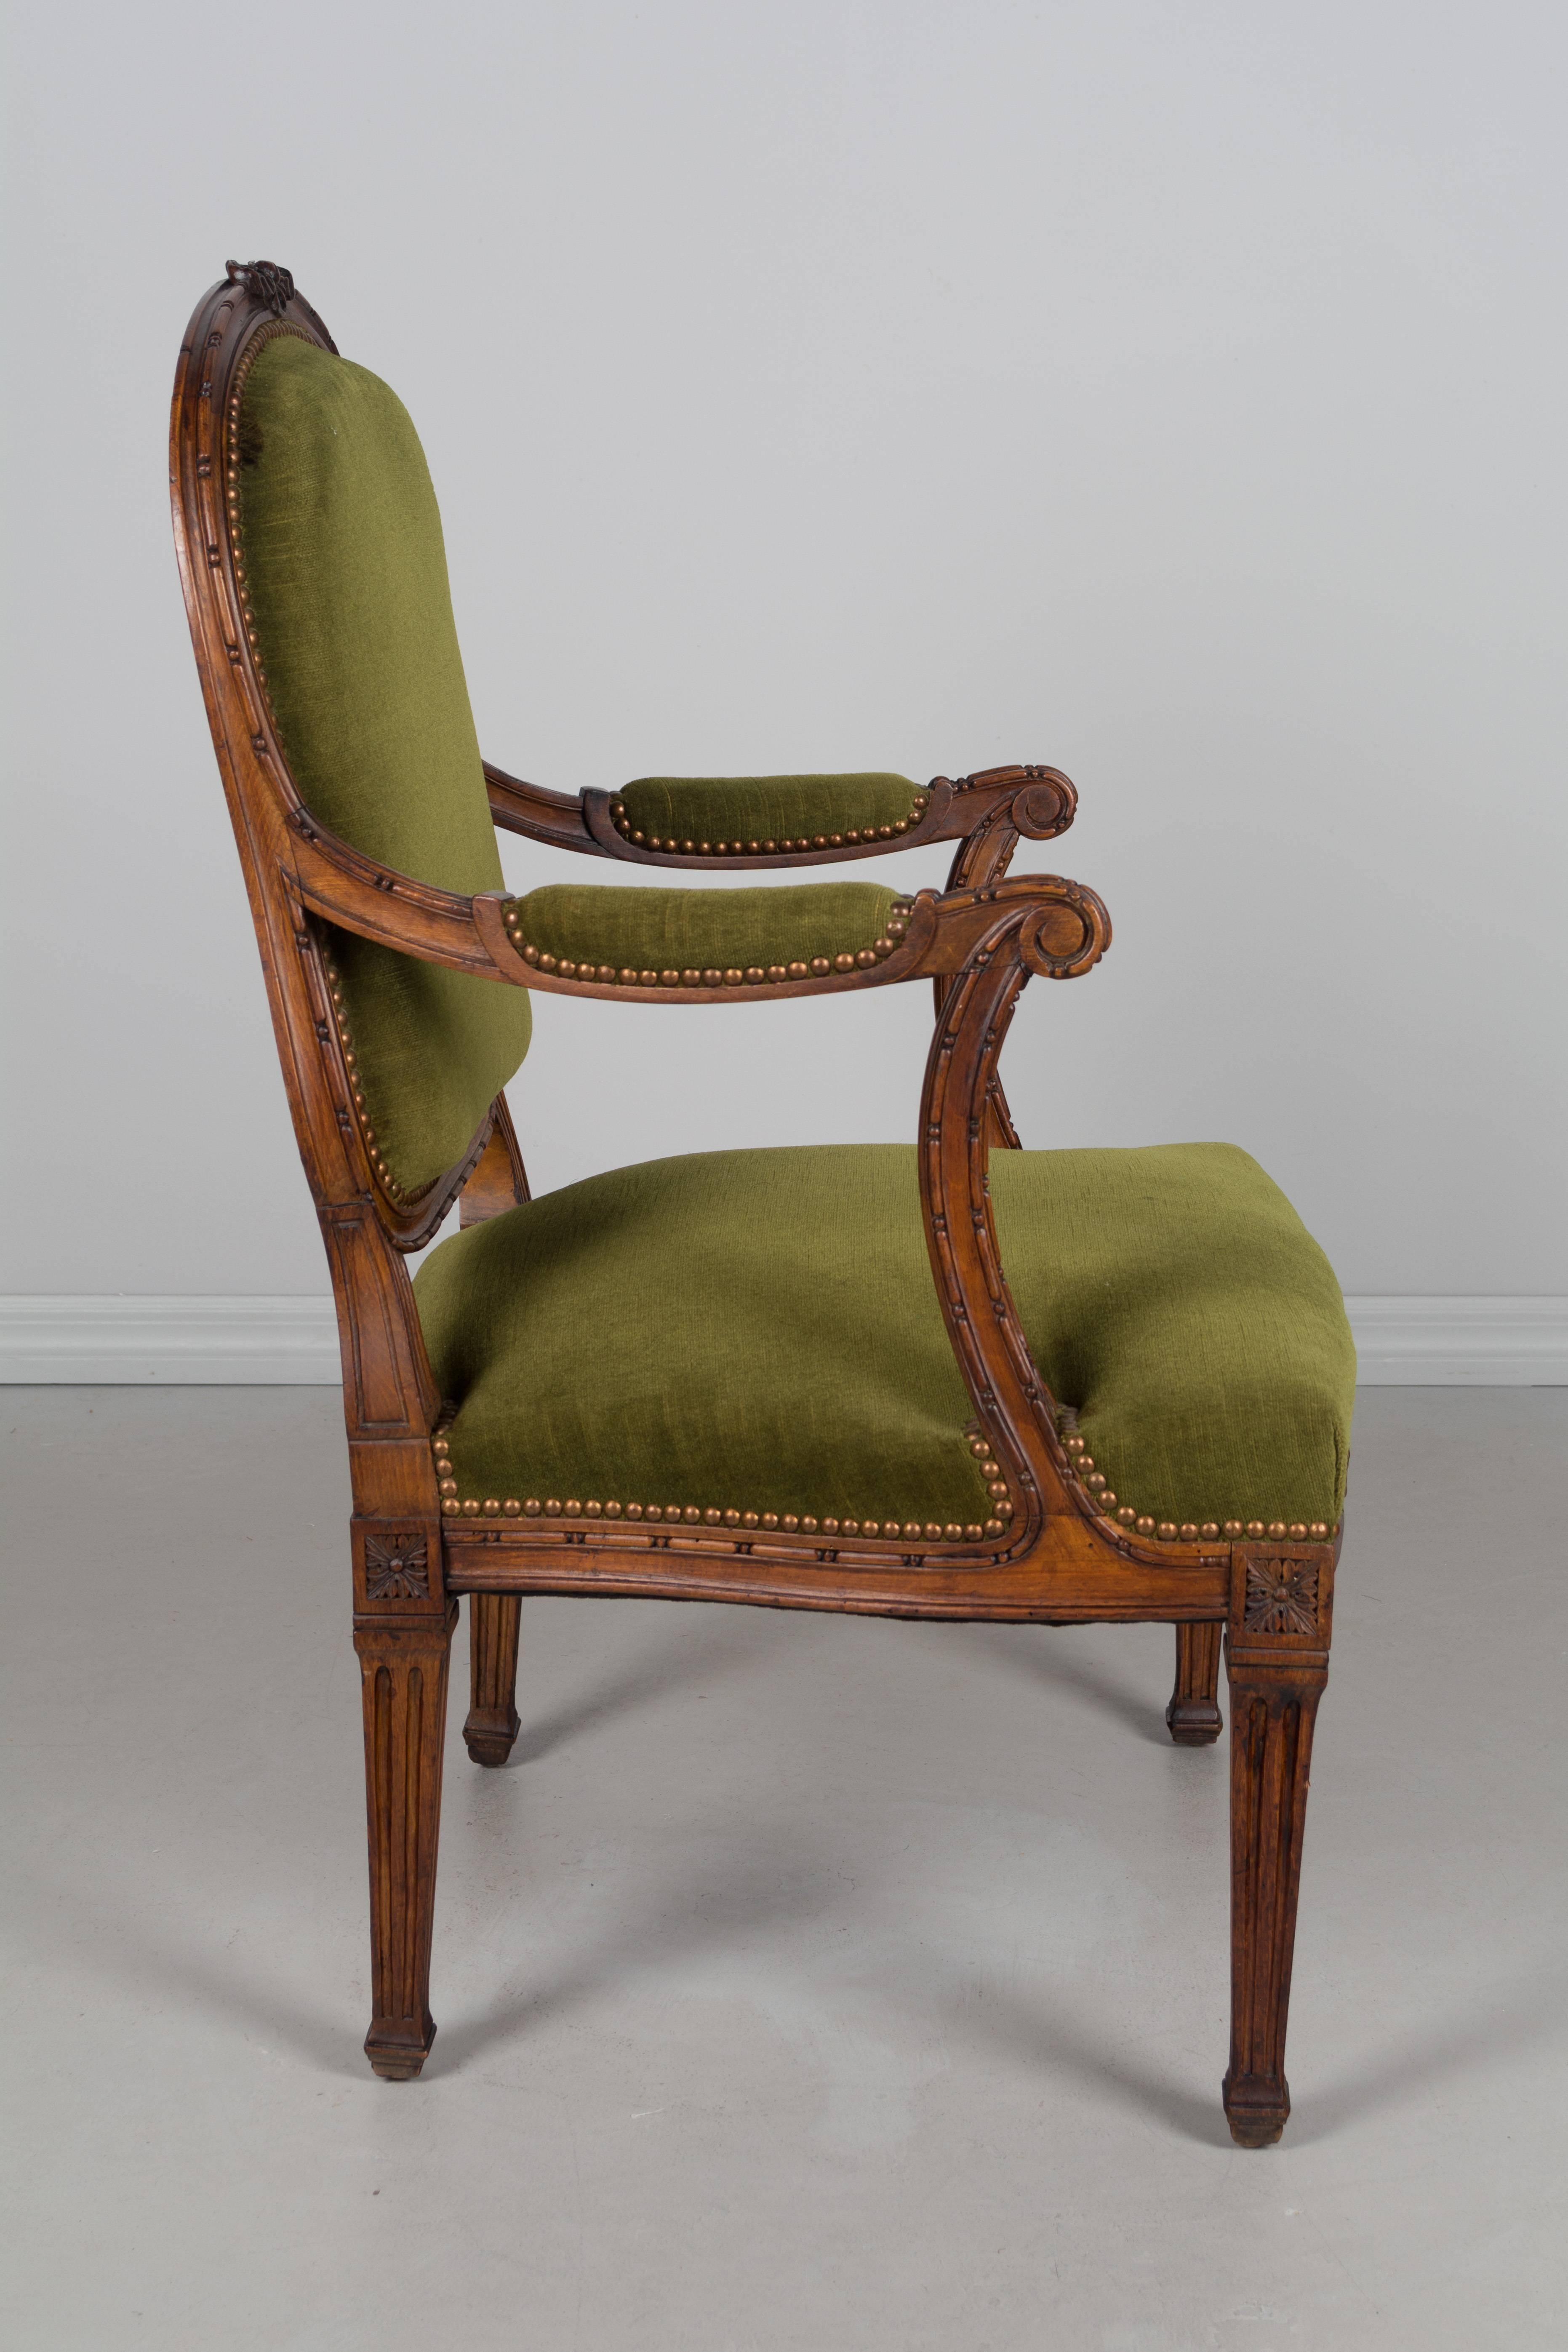 Upholstery 19th Century Louis XVI Style Fauteuil